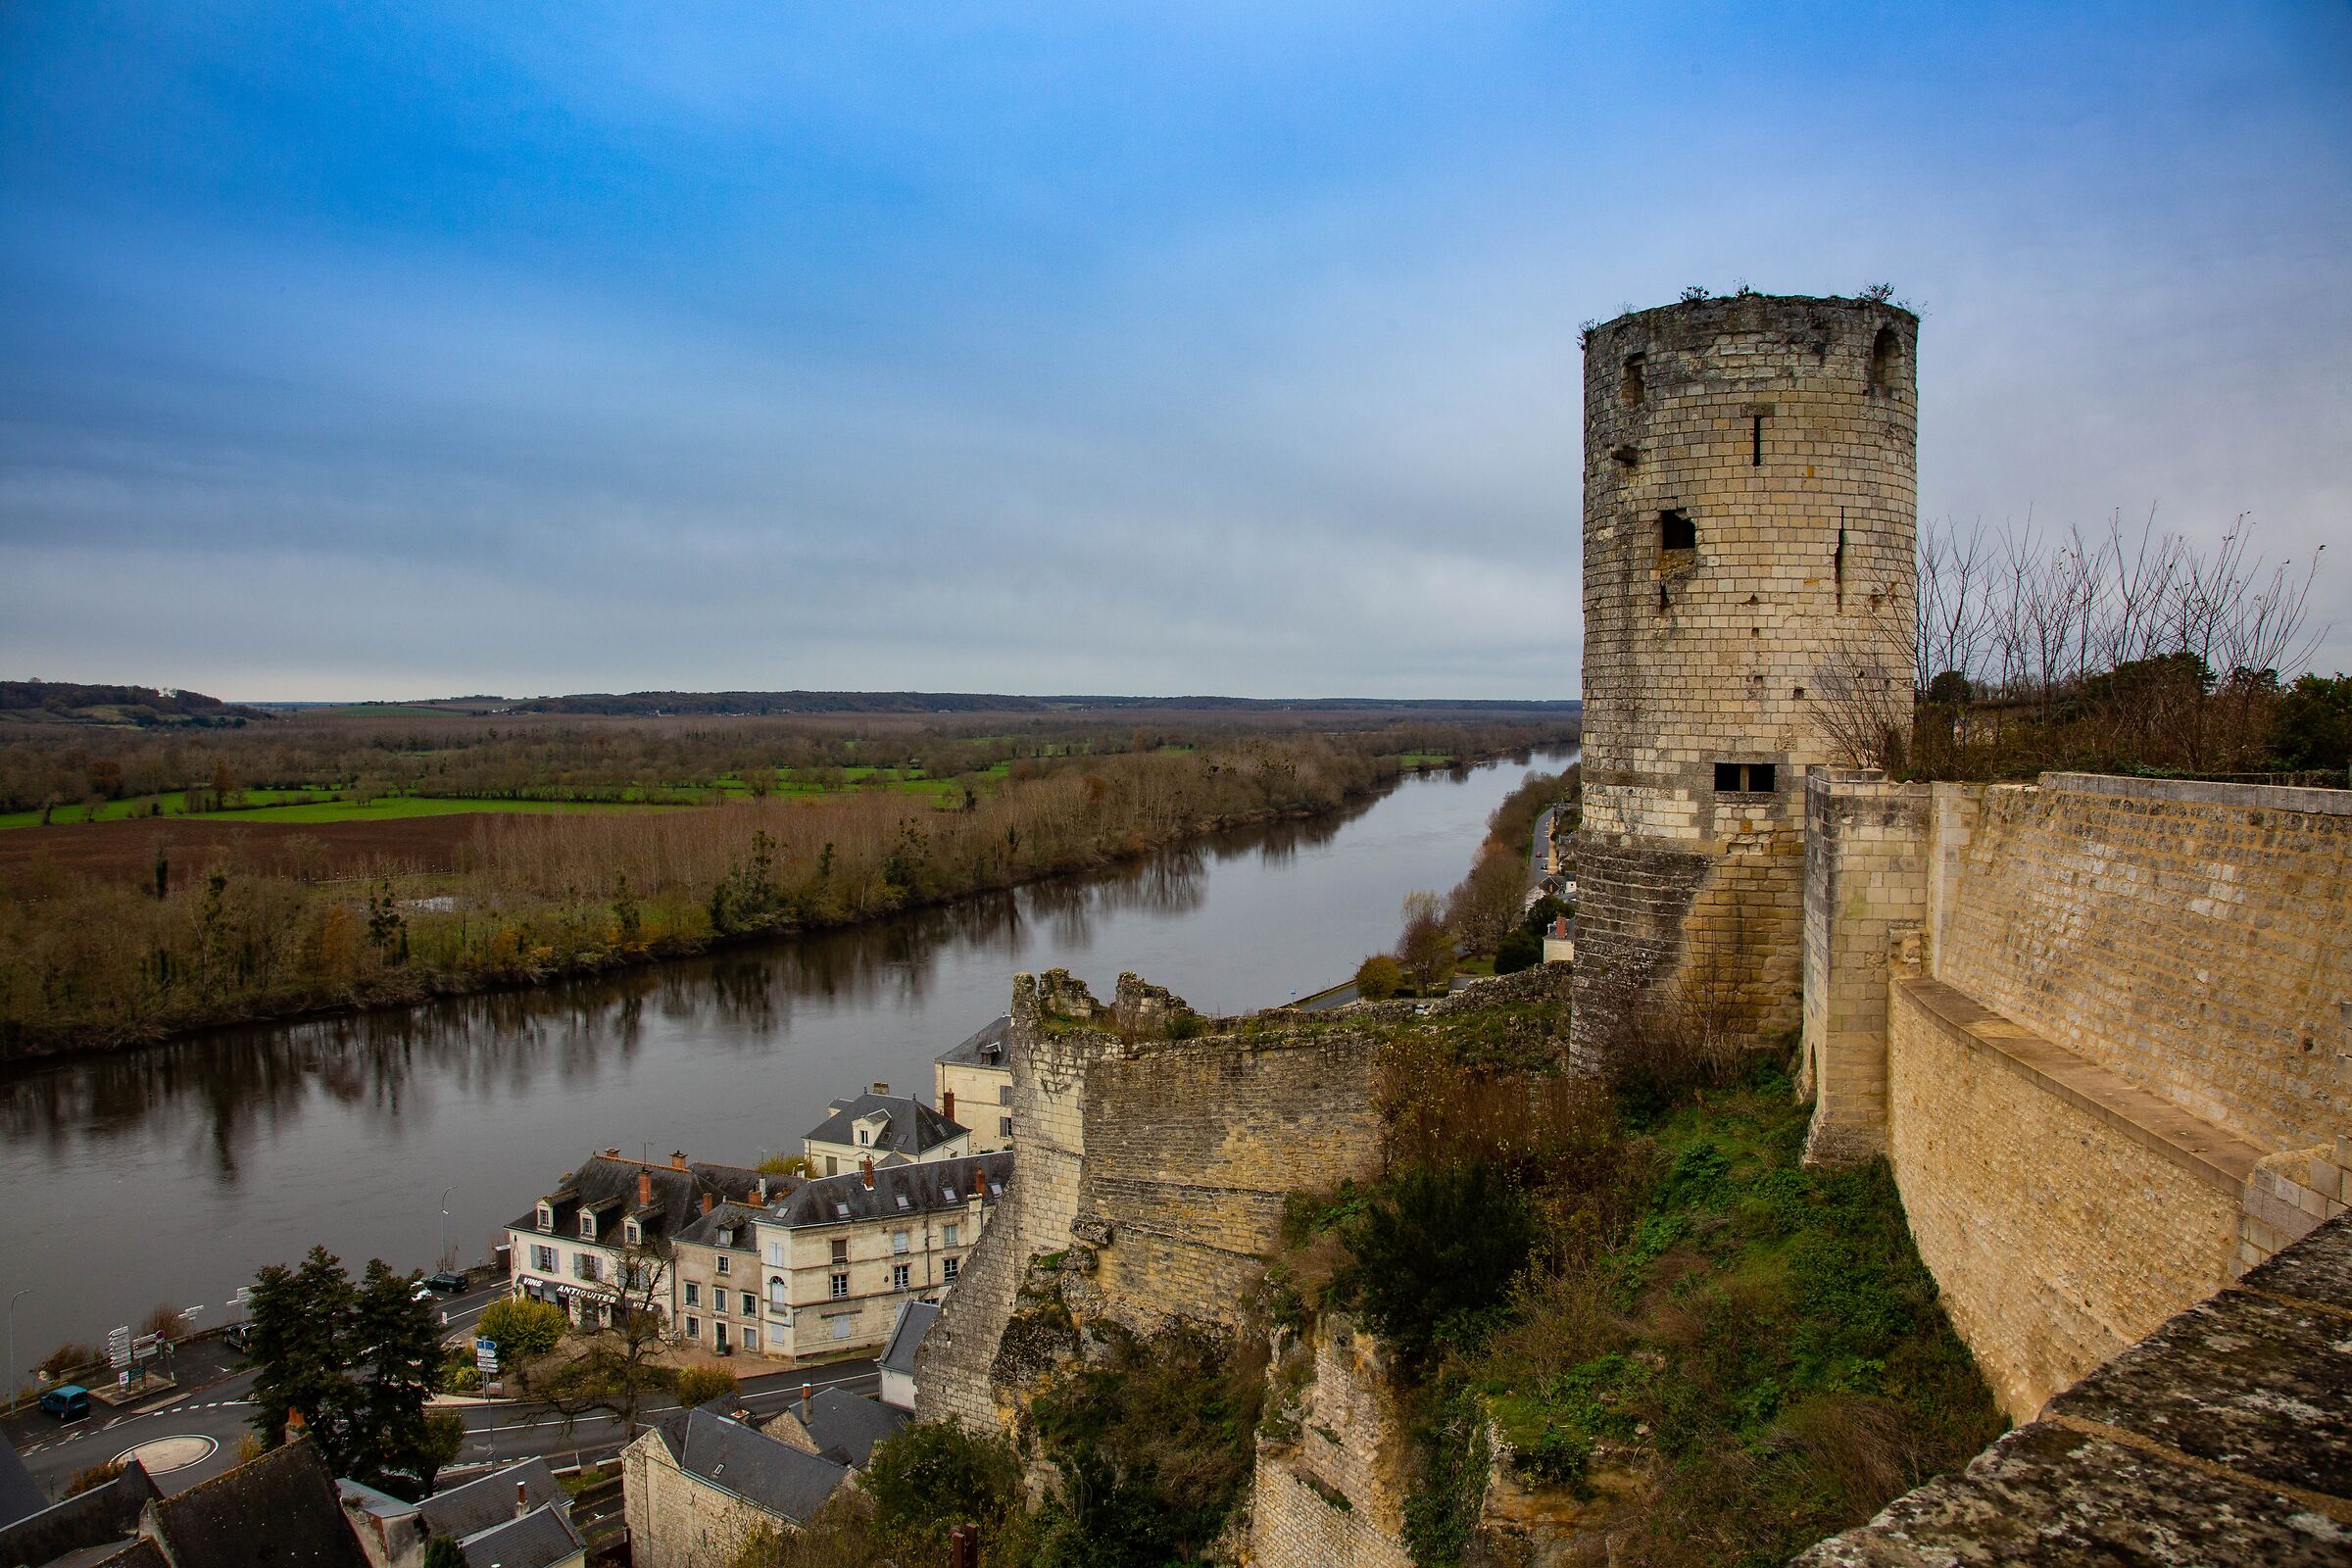 View from Chinon Castle ...